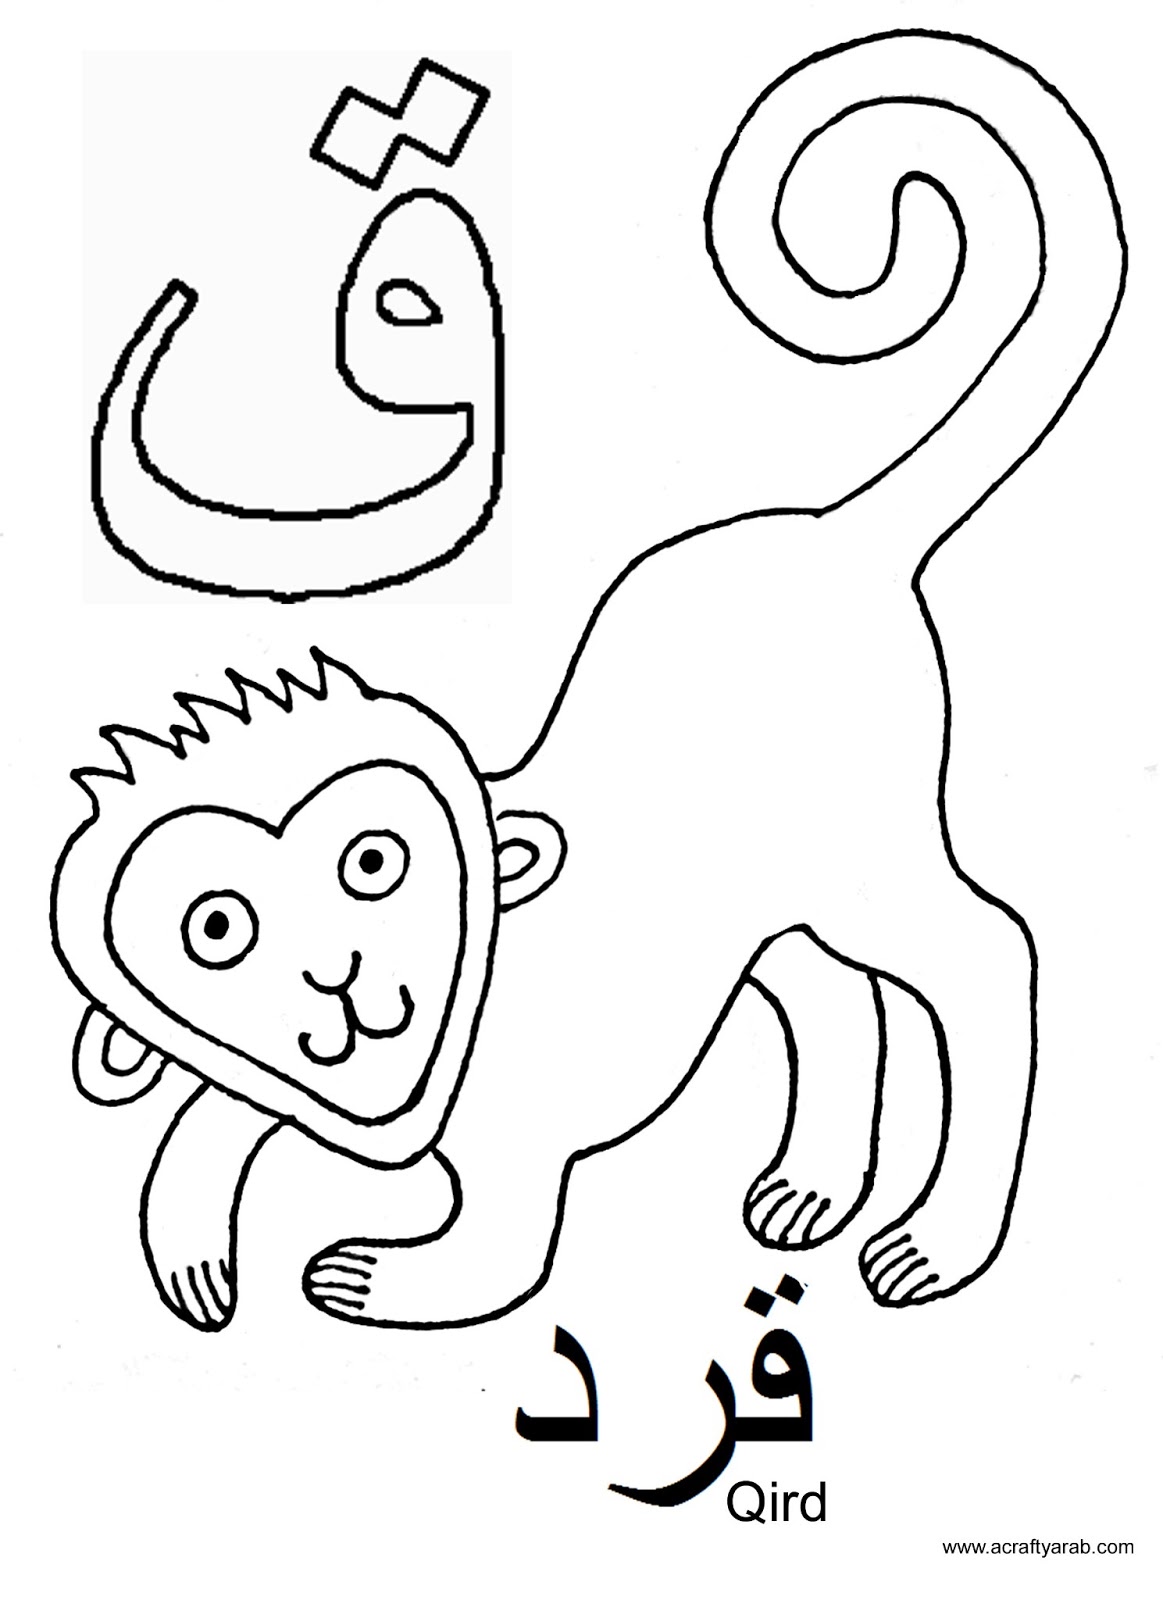 Download A Crafty Arab: Arabic Alphabet coloring pages...Qaf is for ...